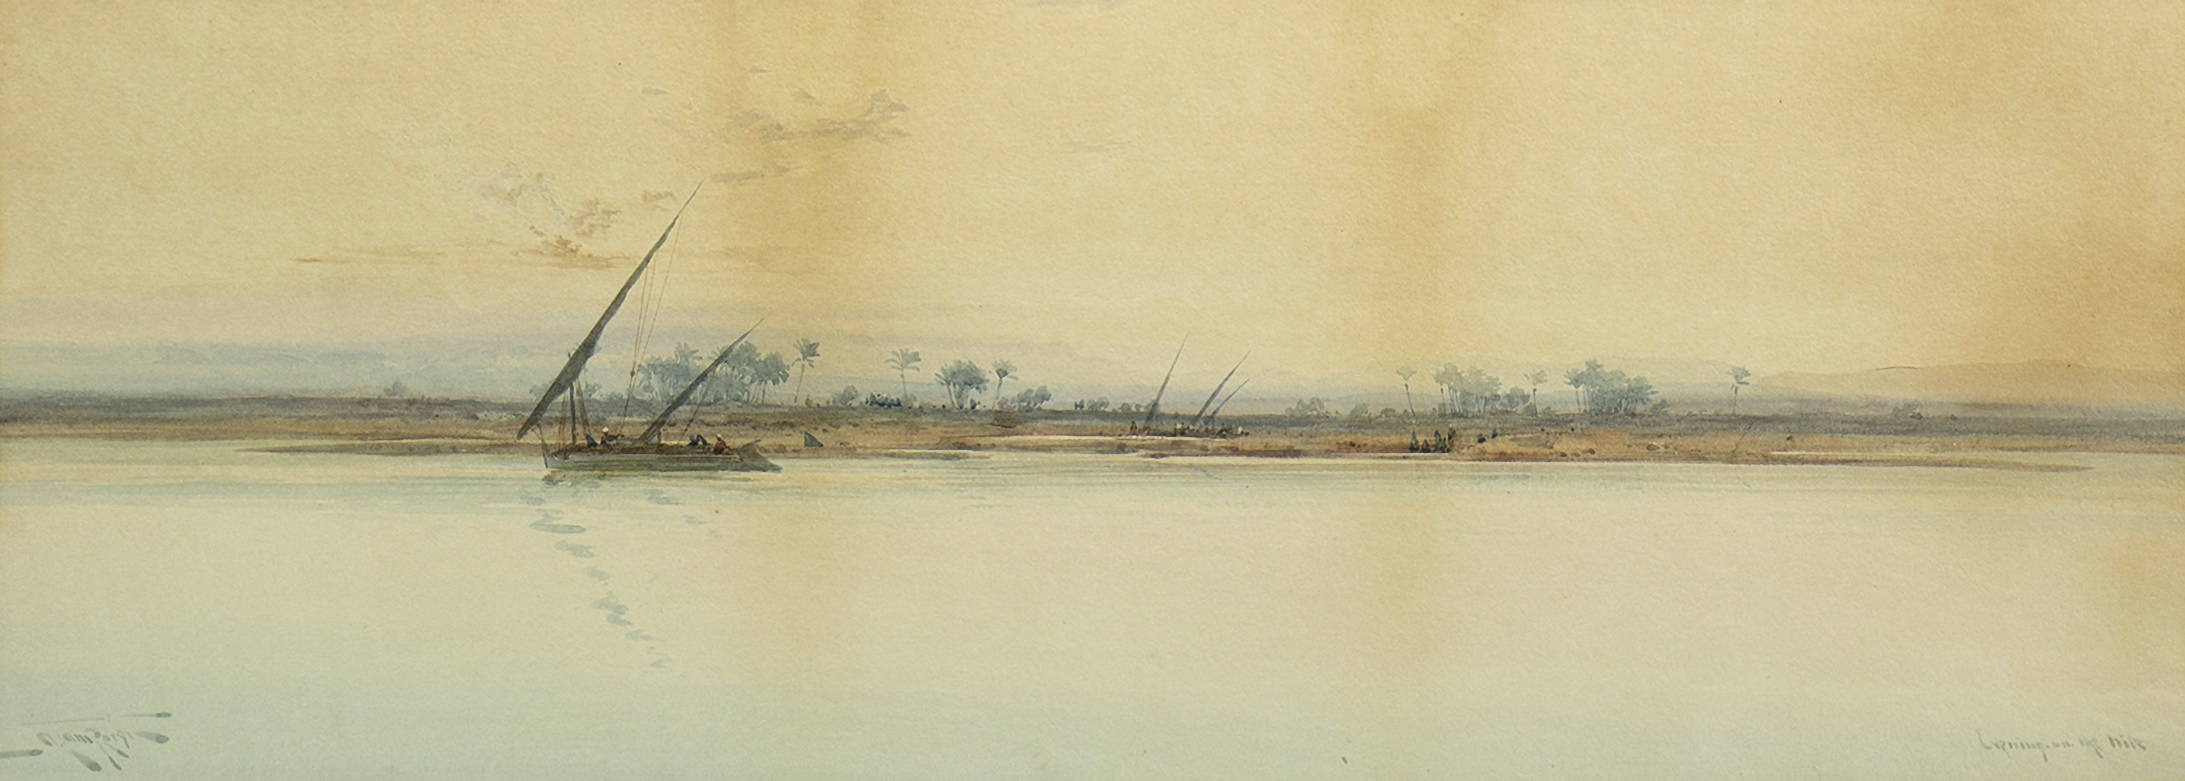 EVENING ON THE NILE, A WATERCOLOUR BY AUGUSTUS OSBORNE - Image 2 of 2